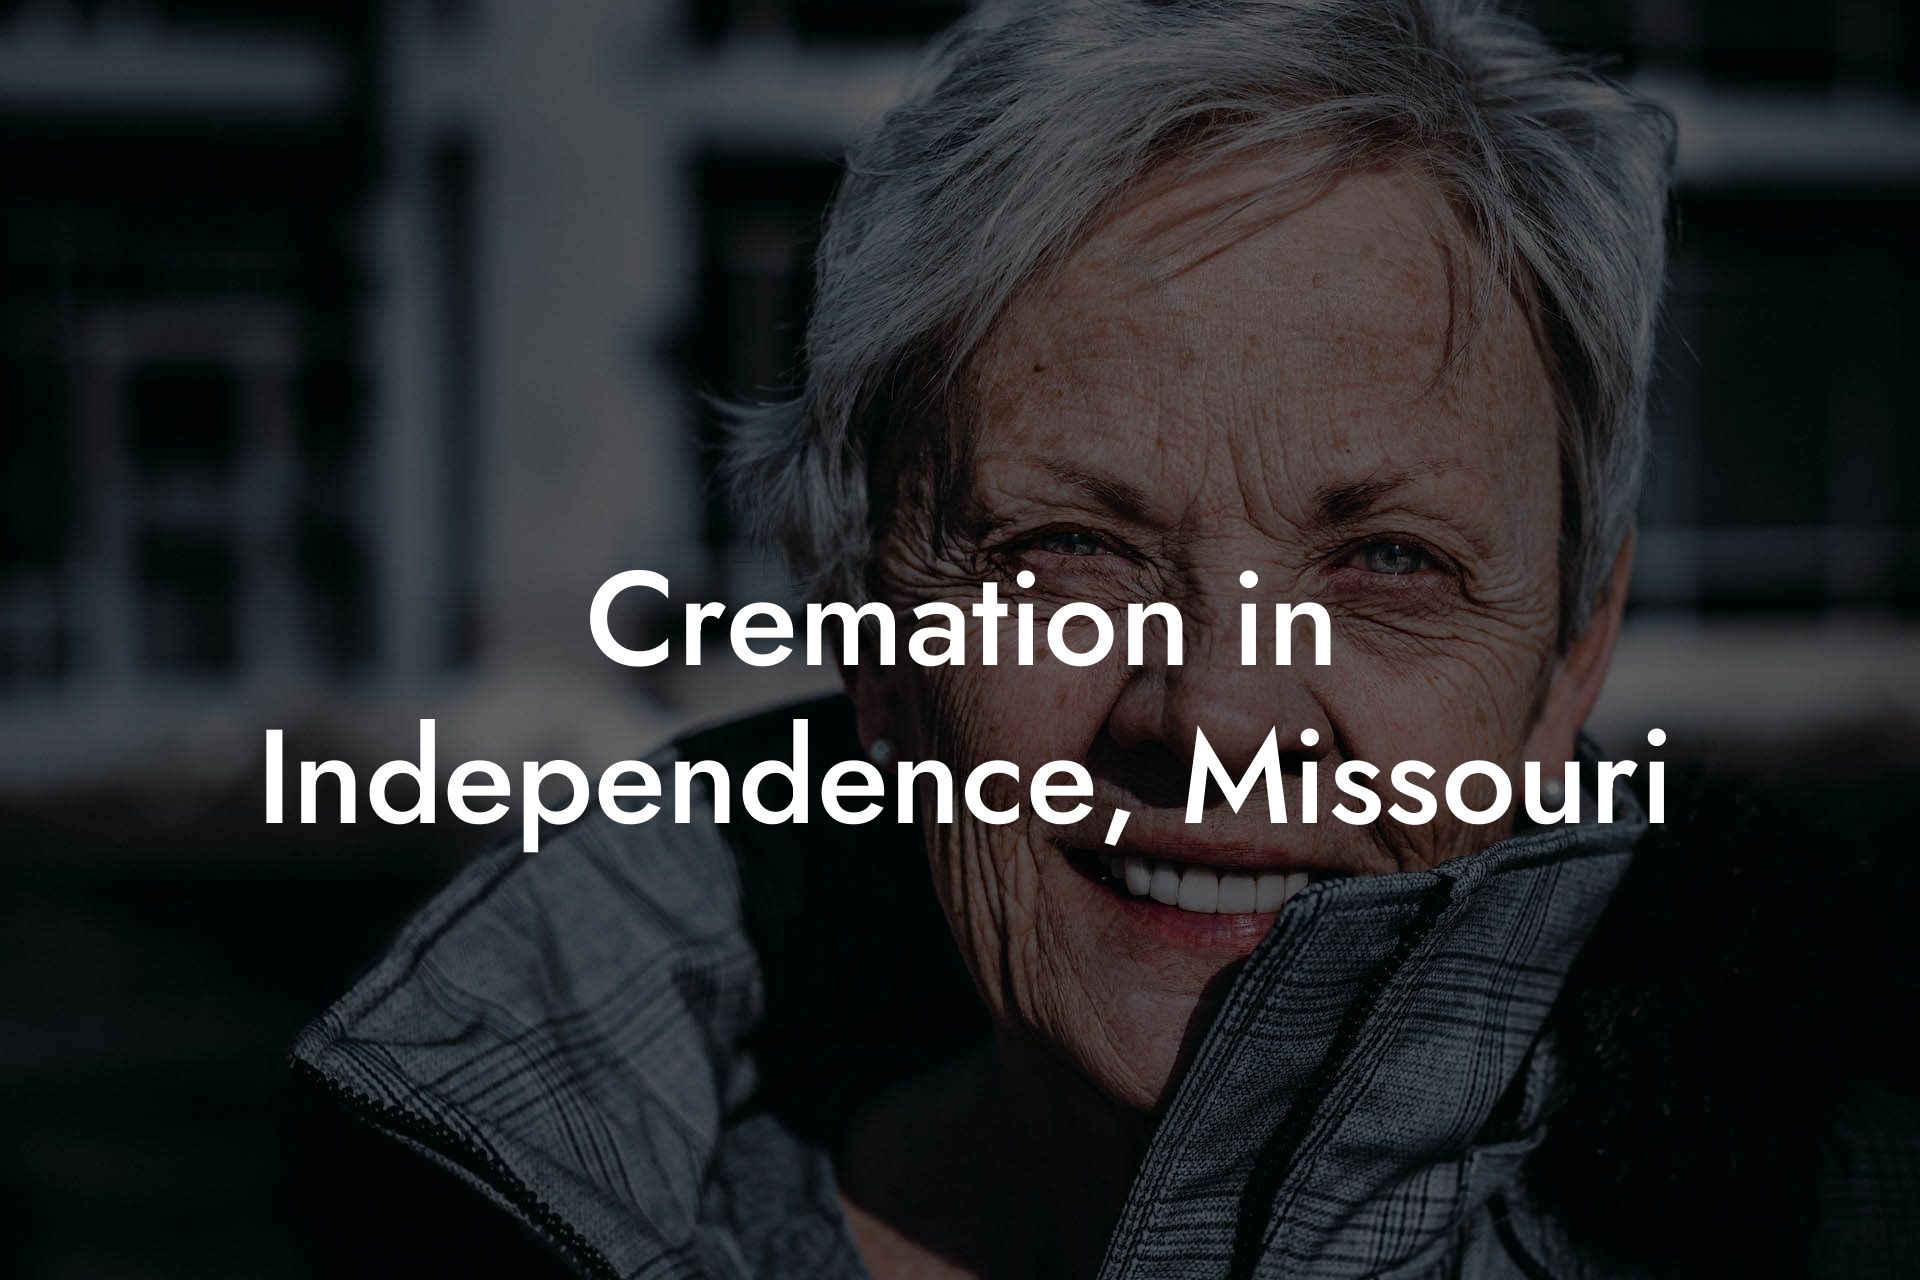 Cremation in Independence, Missouri